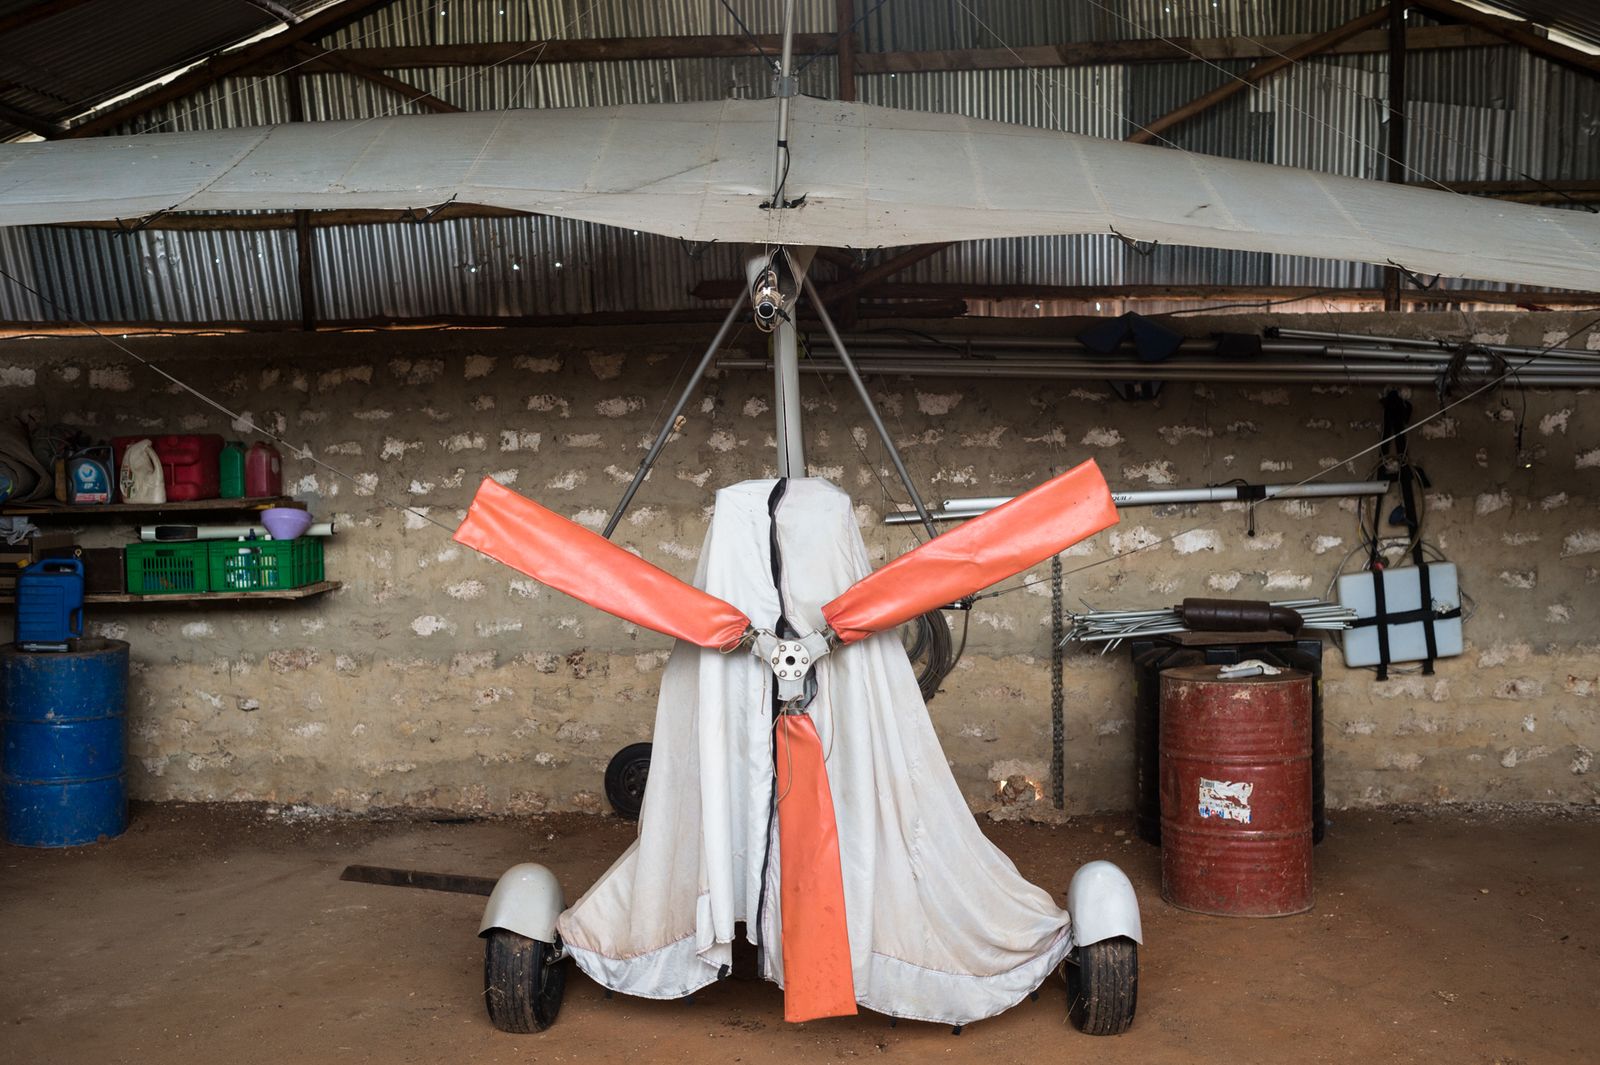 © Jansen van Staden - The reconstructed microlight, as it still stands in the shed, about a kilometre from the crash site, Ukunda, Kenya, 2017